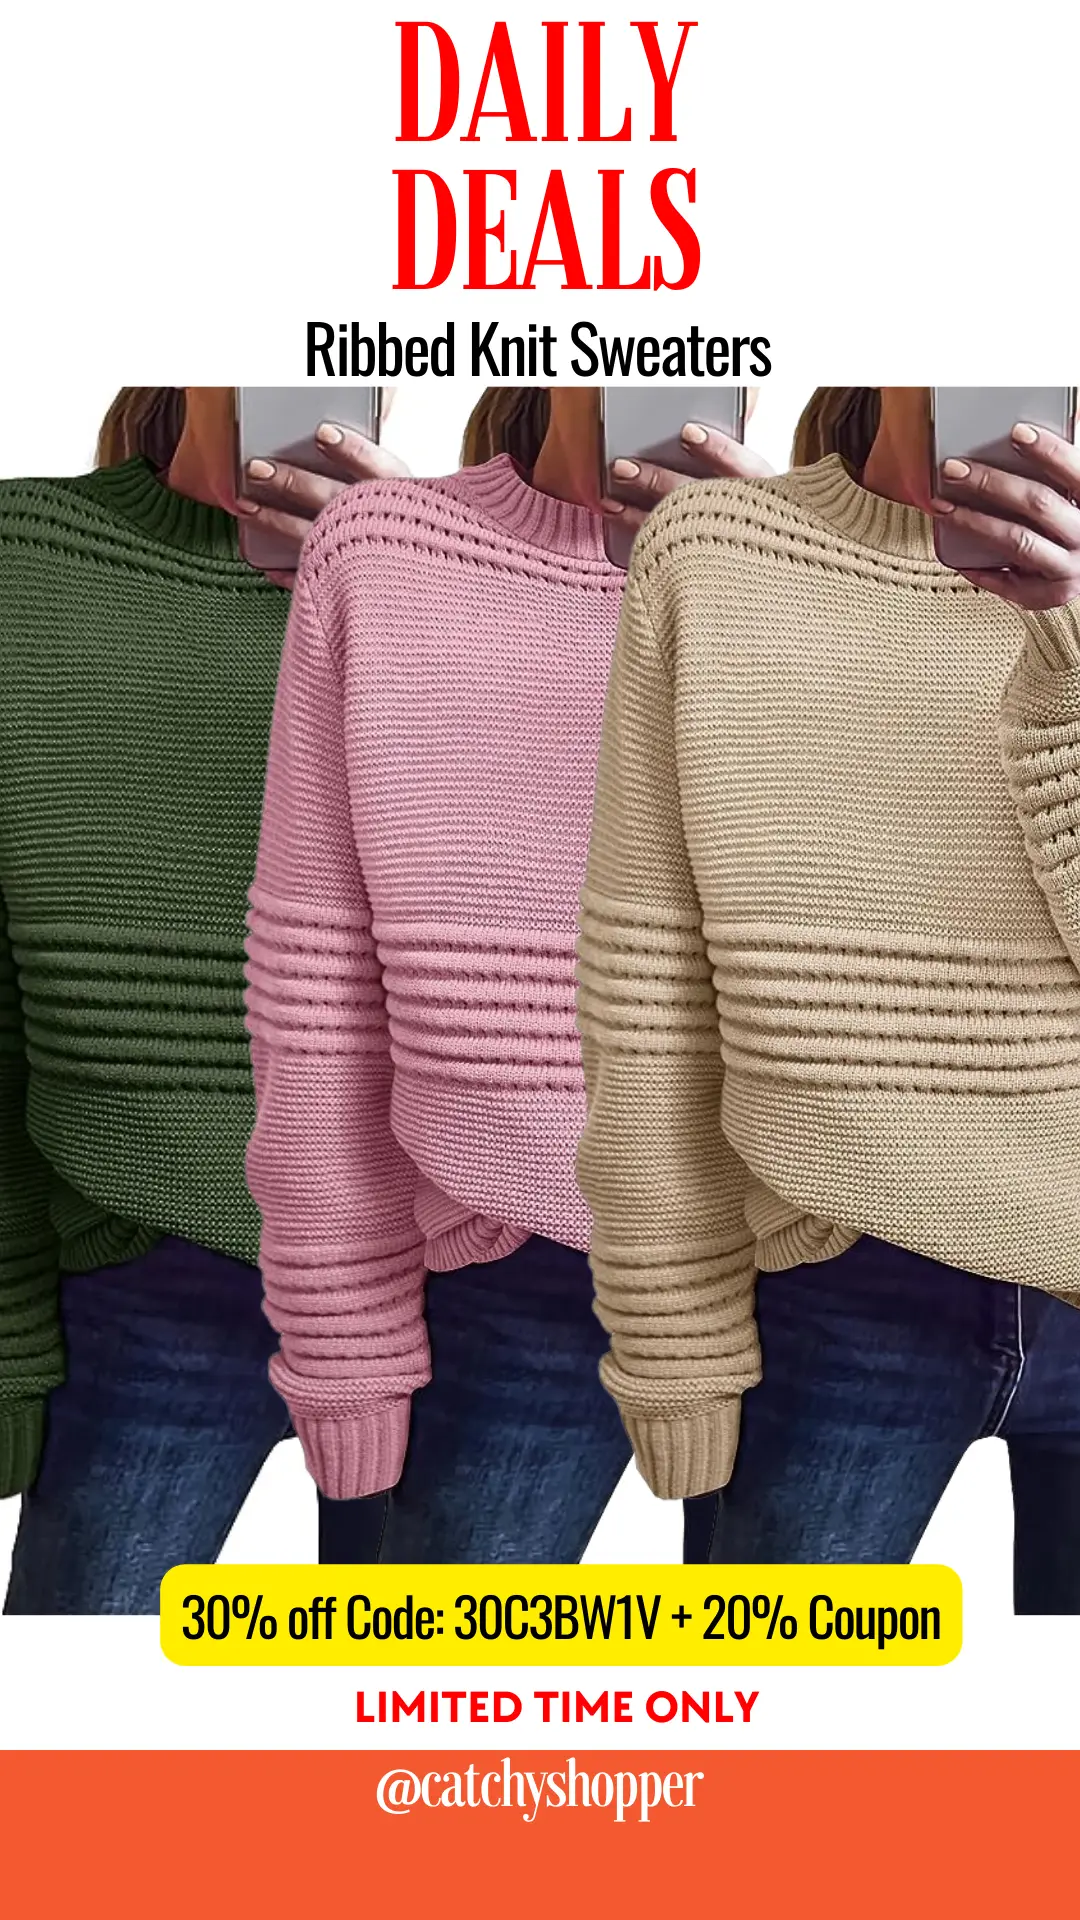 Ribbed Knit Sweaters